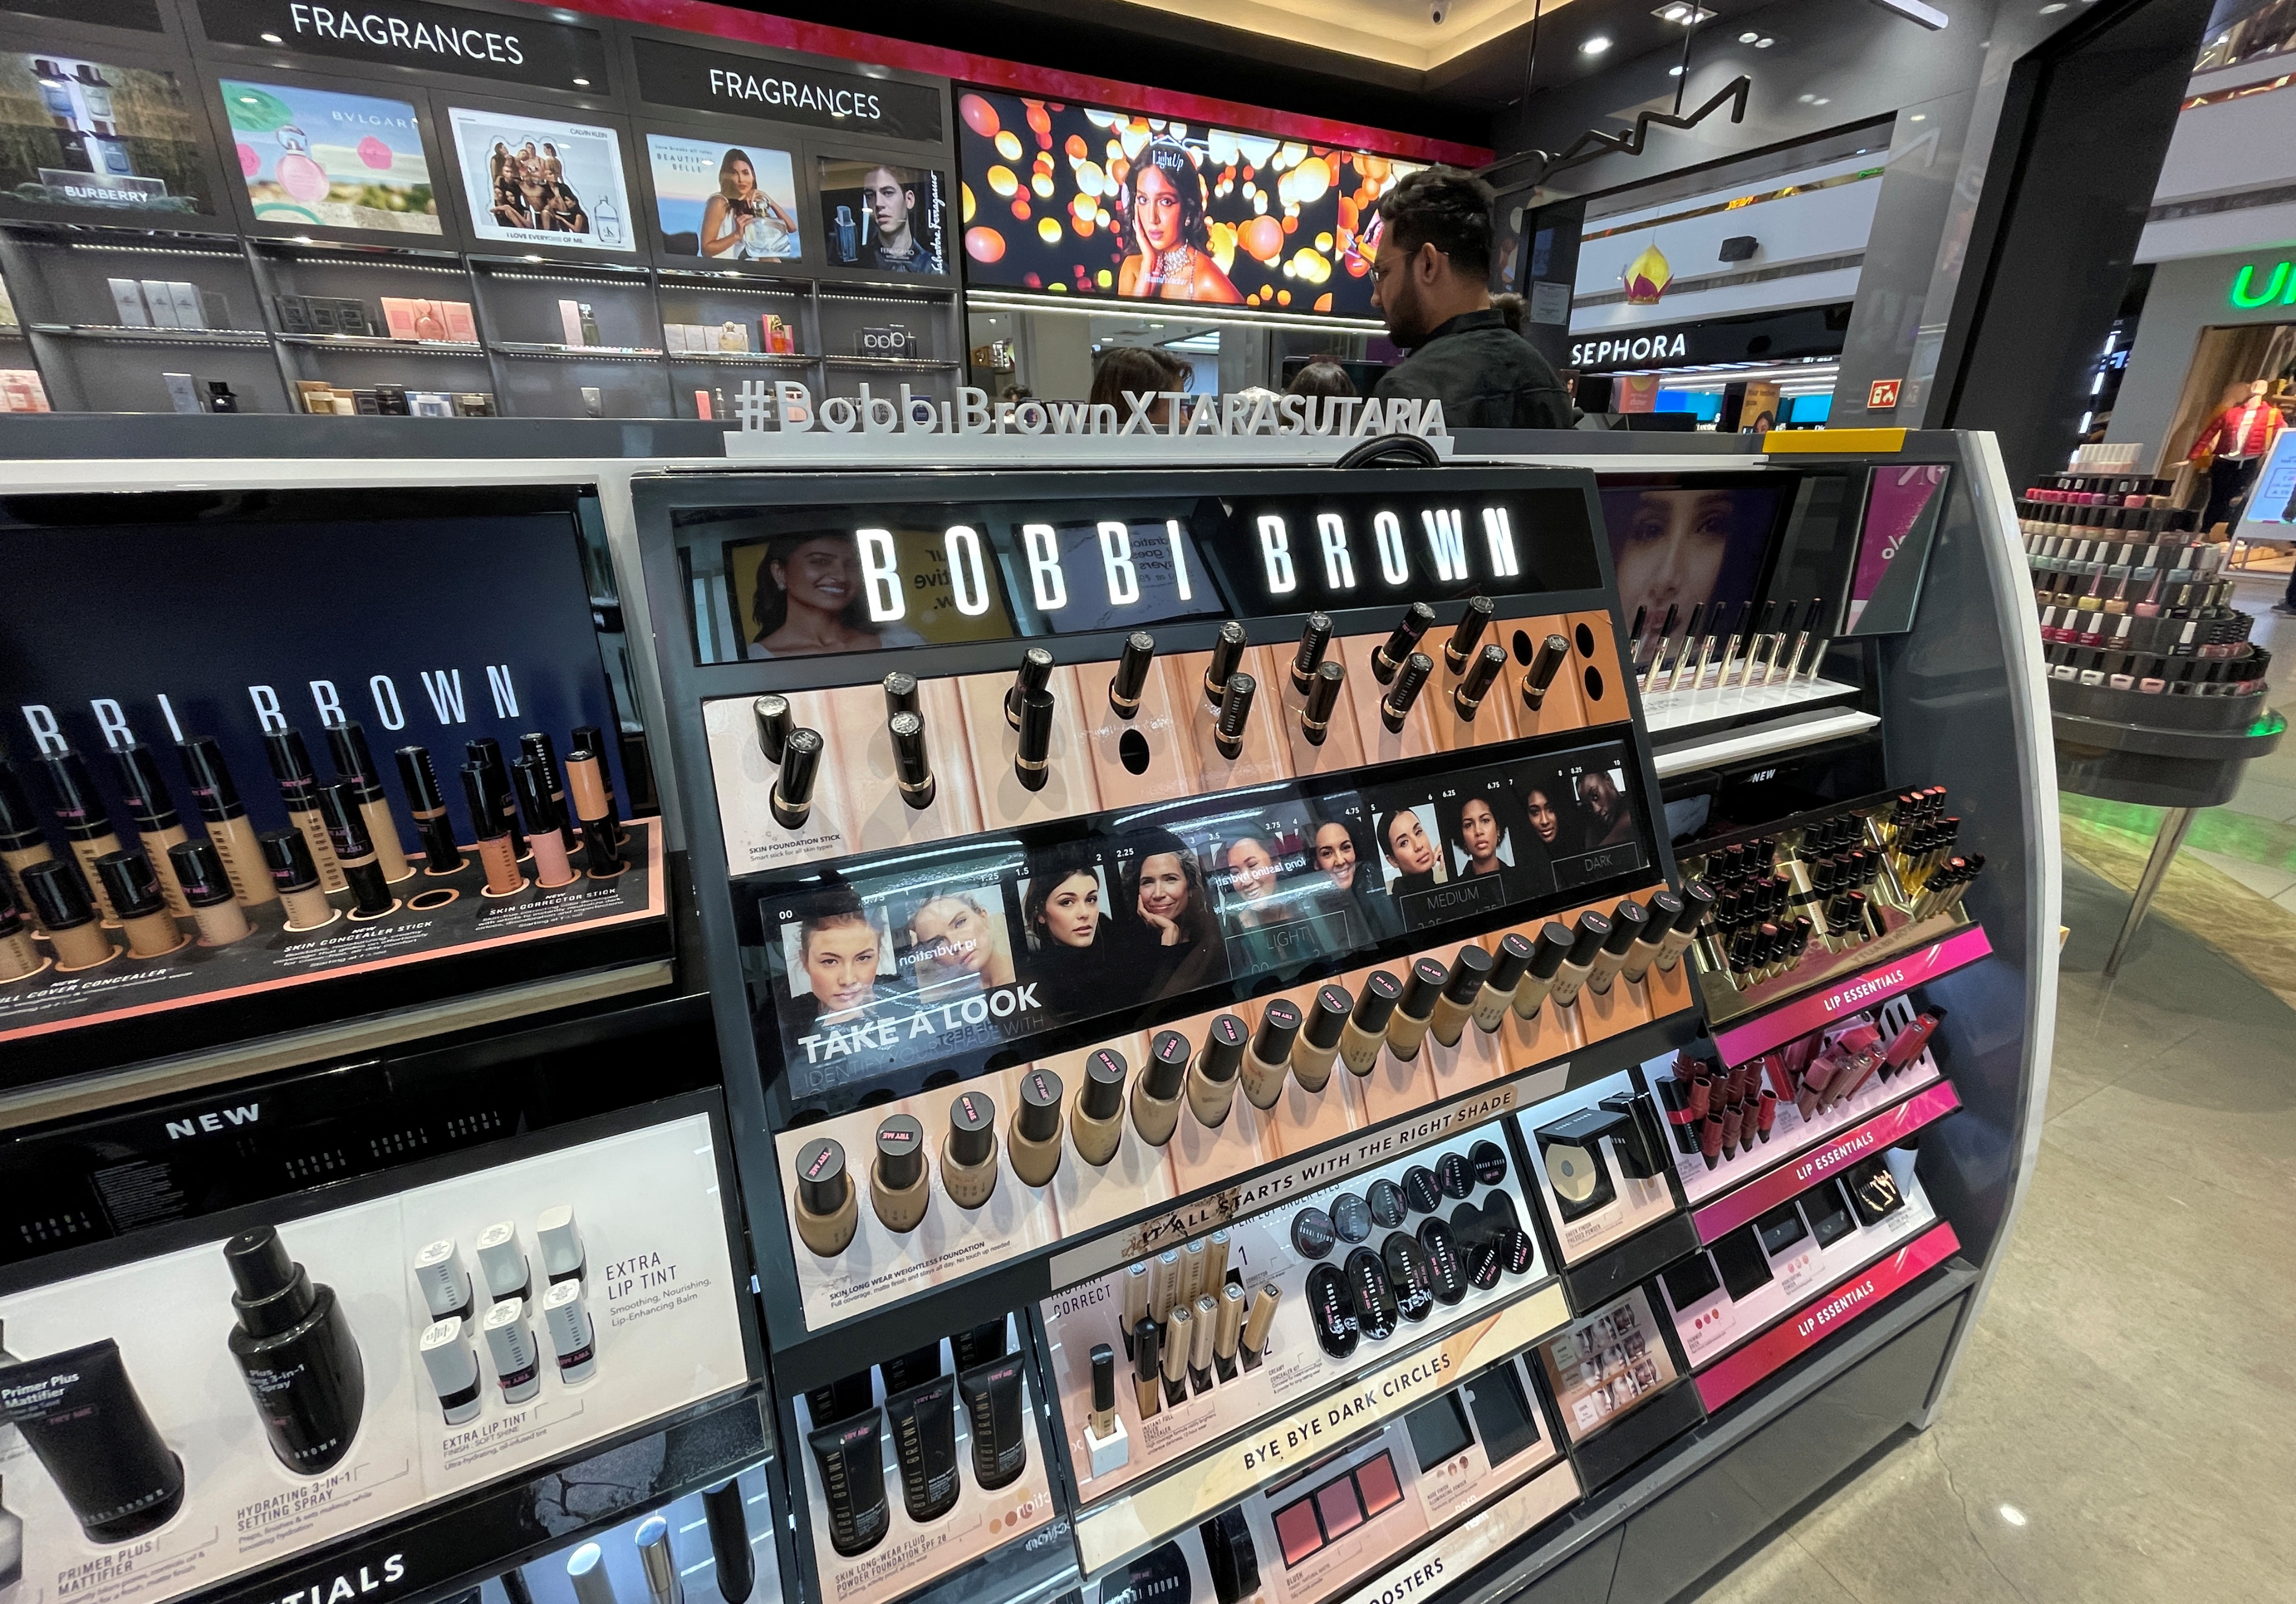 Bobbi Brown cosmetic products are seen for sale inside a store in Ahmedabad